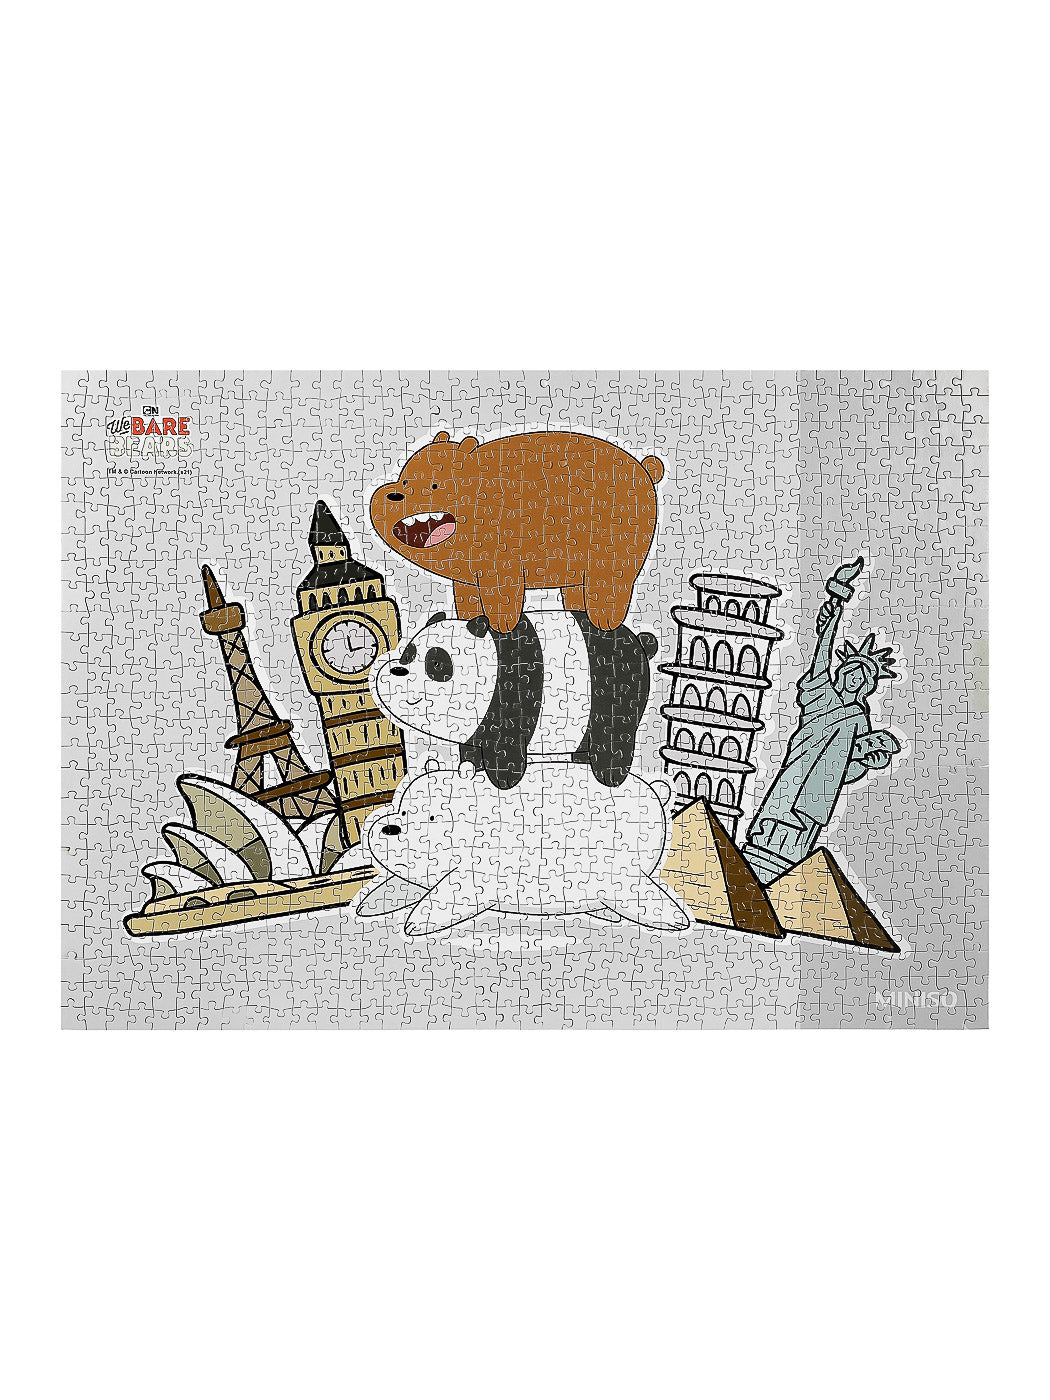 MINISO WE BARE BEARS 1000 PIECES PUZZLE ( PLACES OF INTEREST ) 2010033712106 DIY PUZZLE